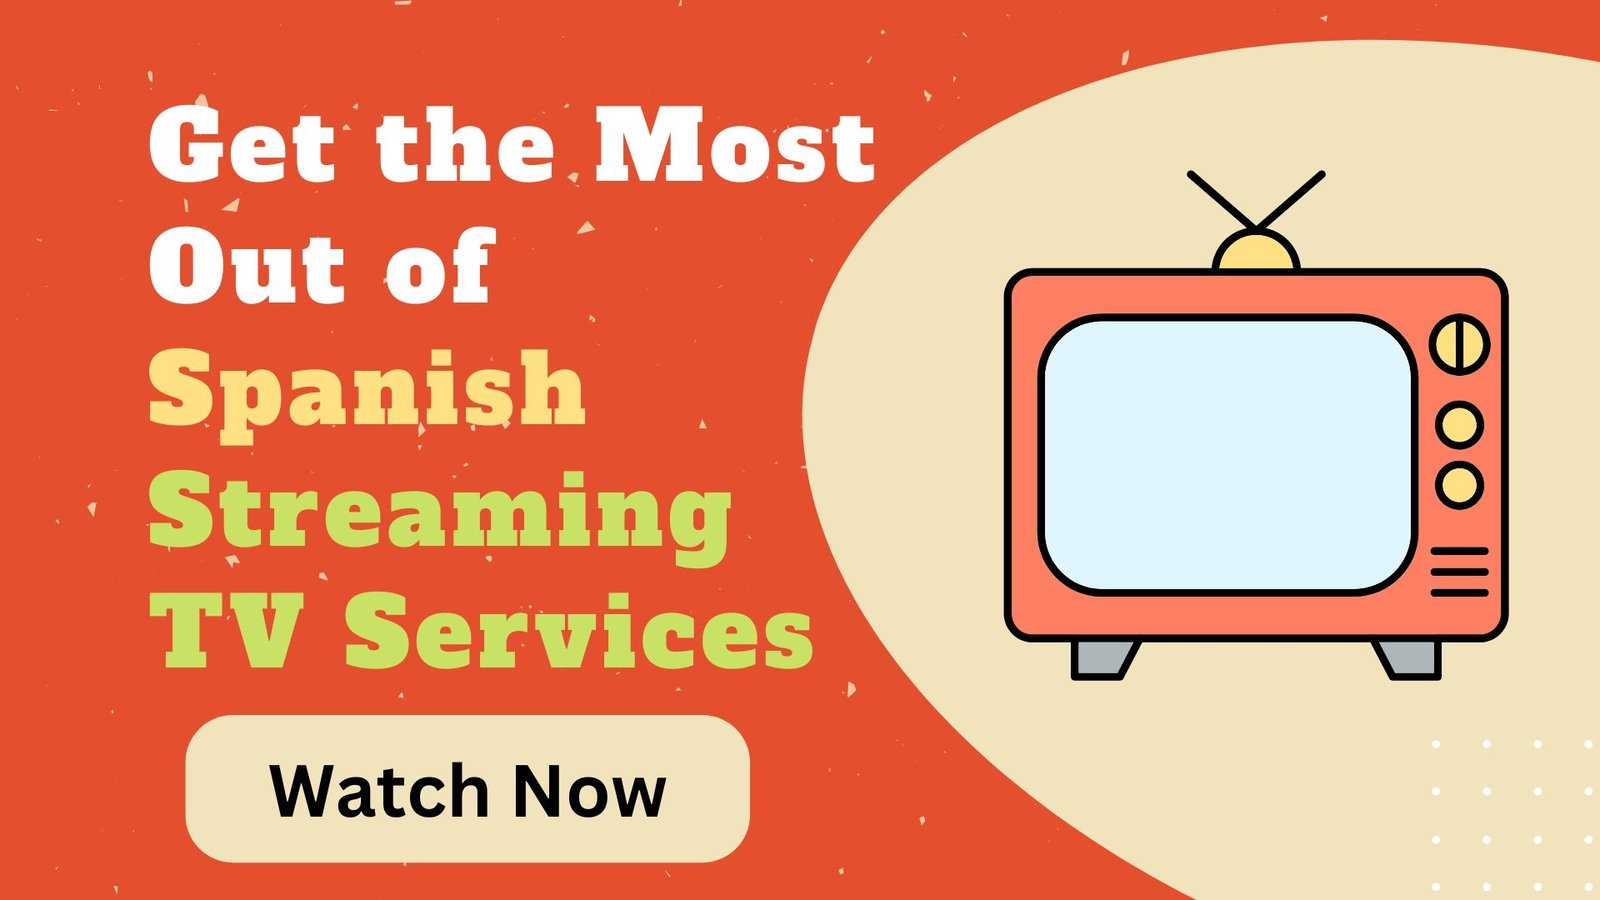 Get the Most Out of Spanish Streaming TV Services